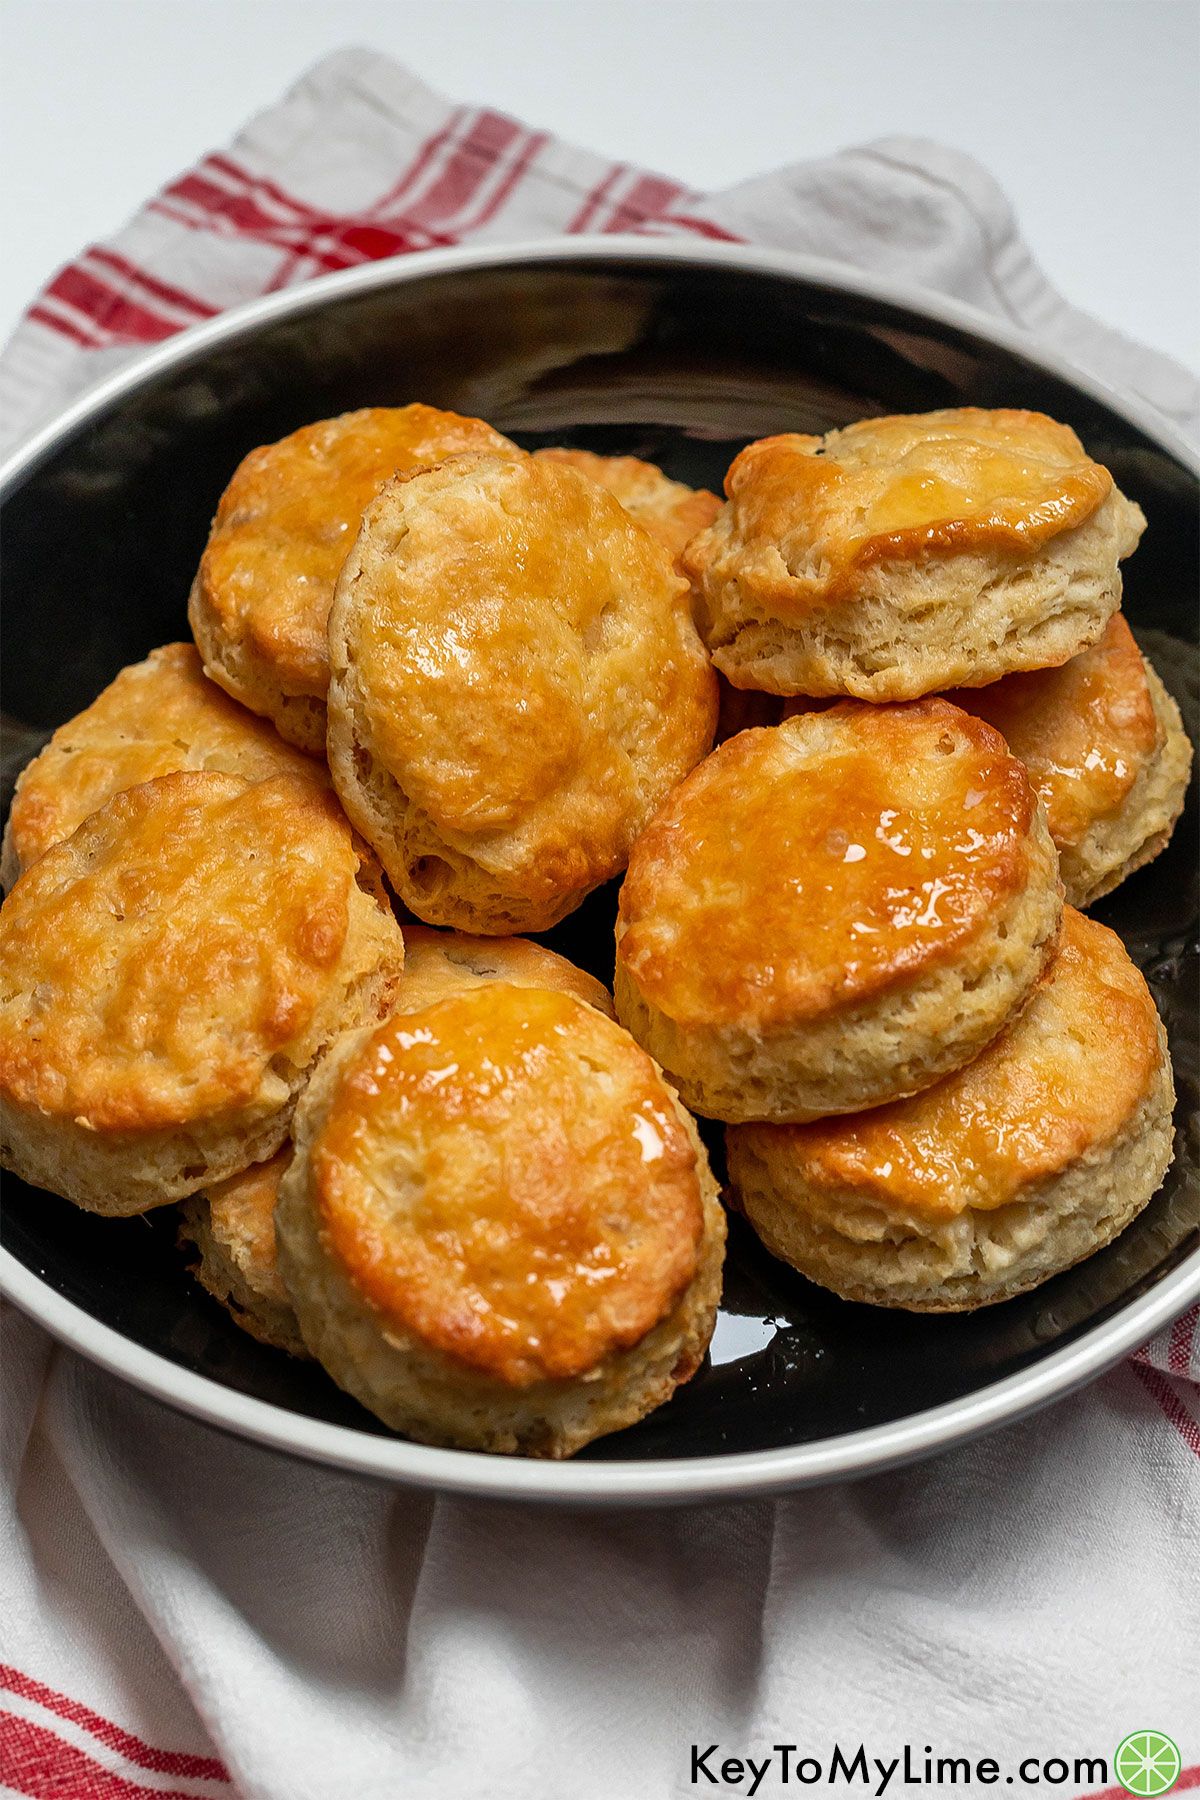 A stack of biscuits inside of a shallow black bowl.